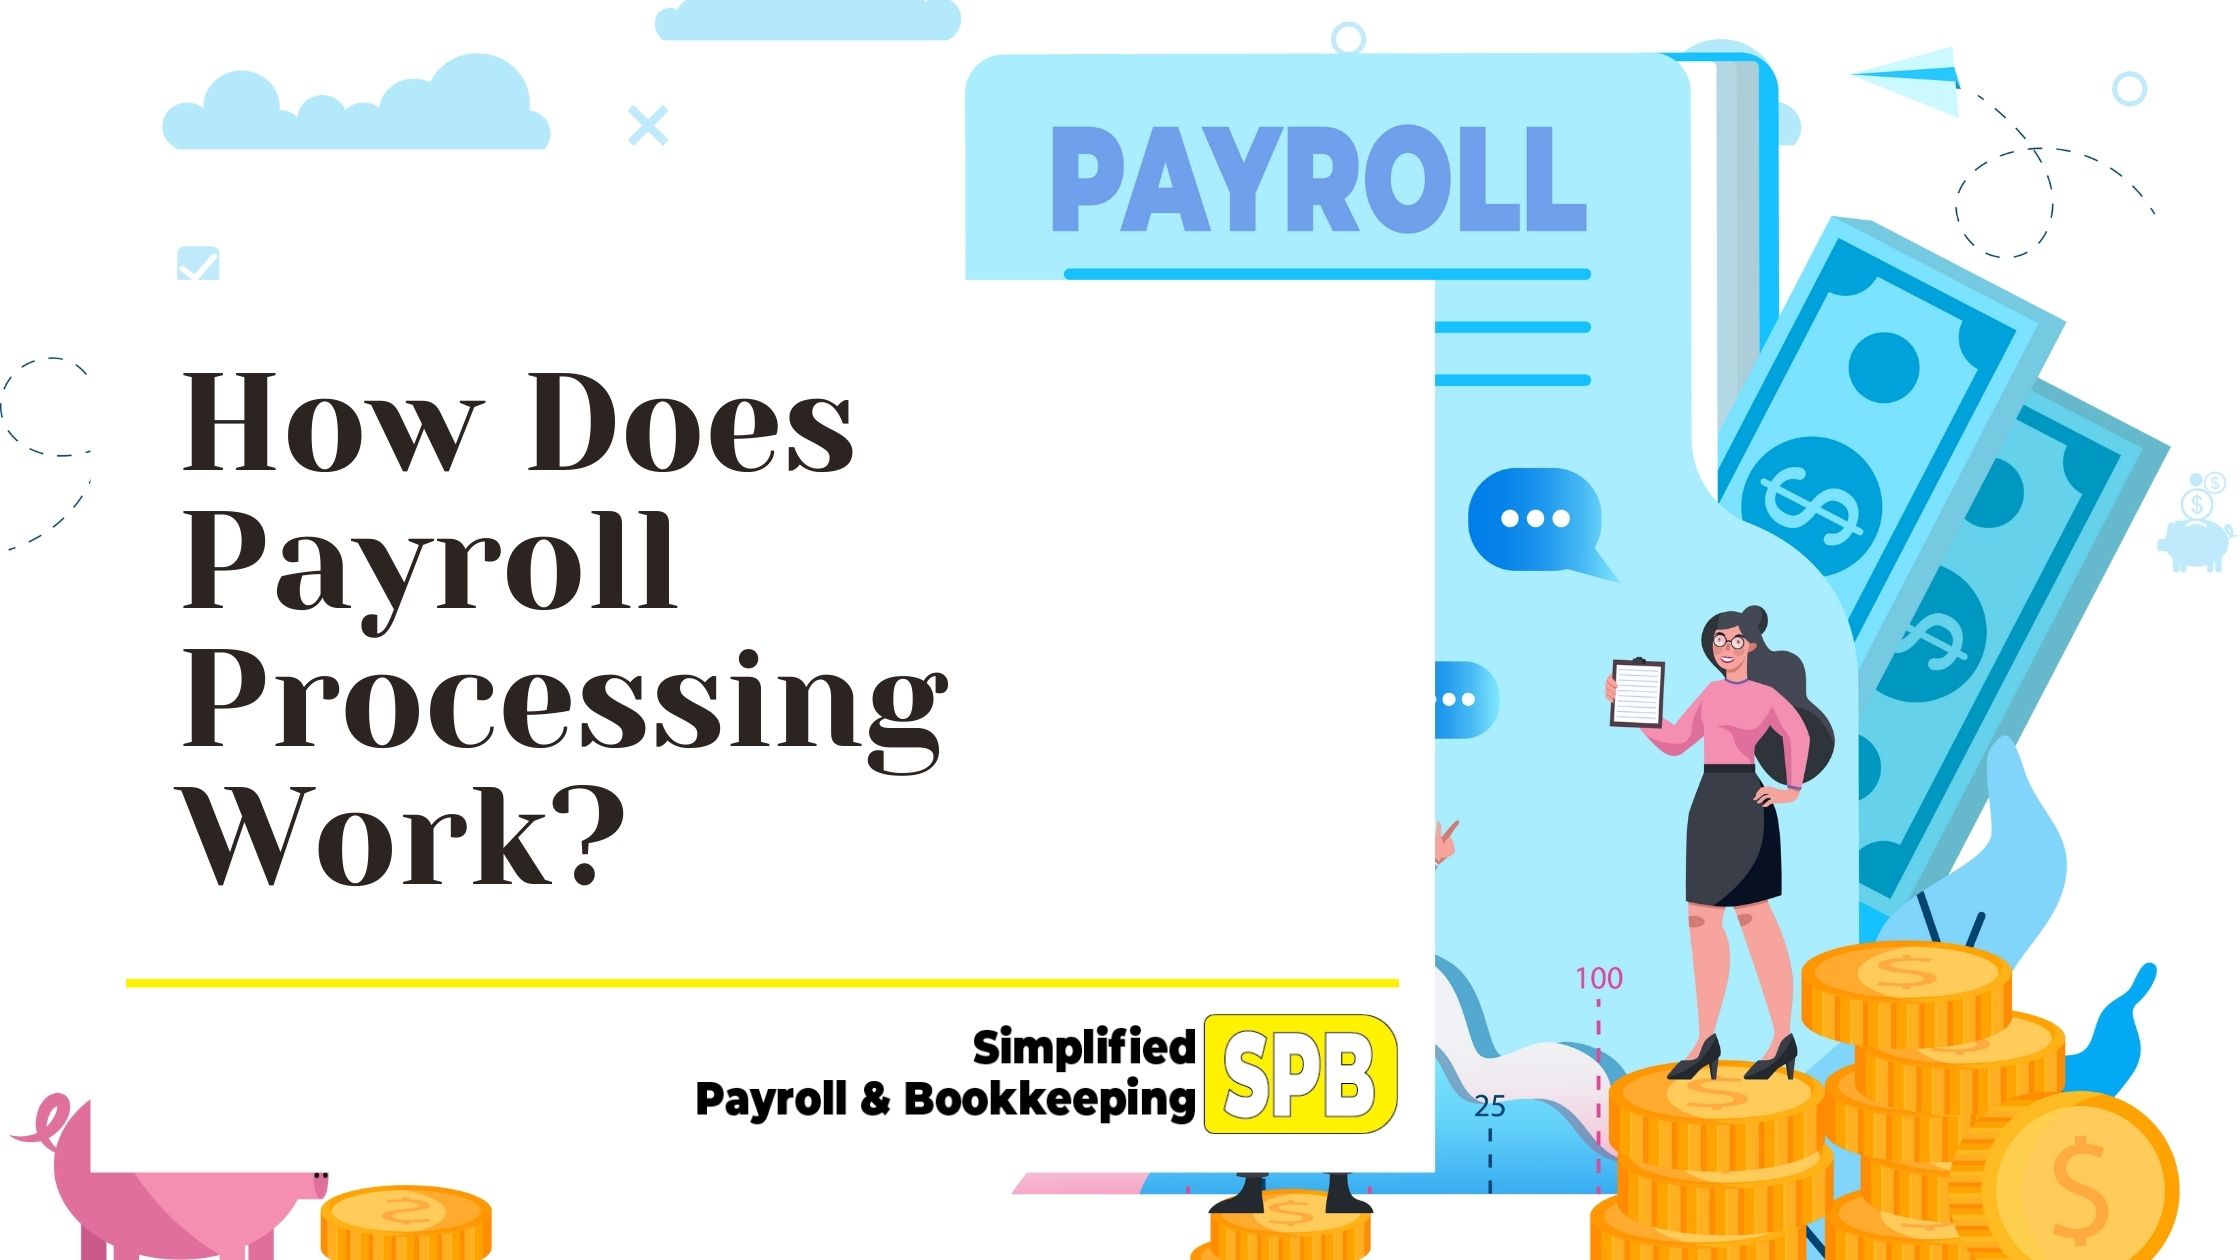 How Does Payroll Processing Work